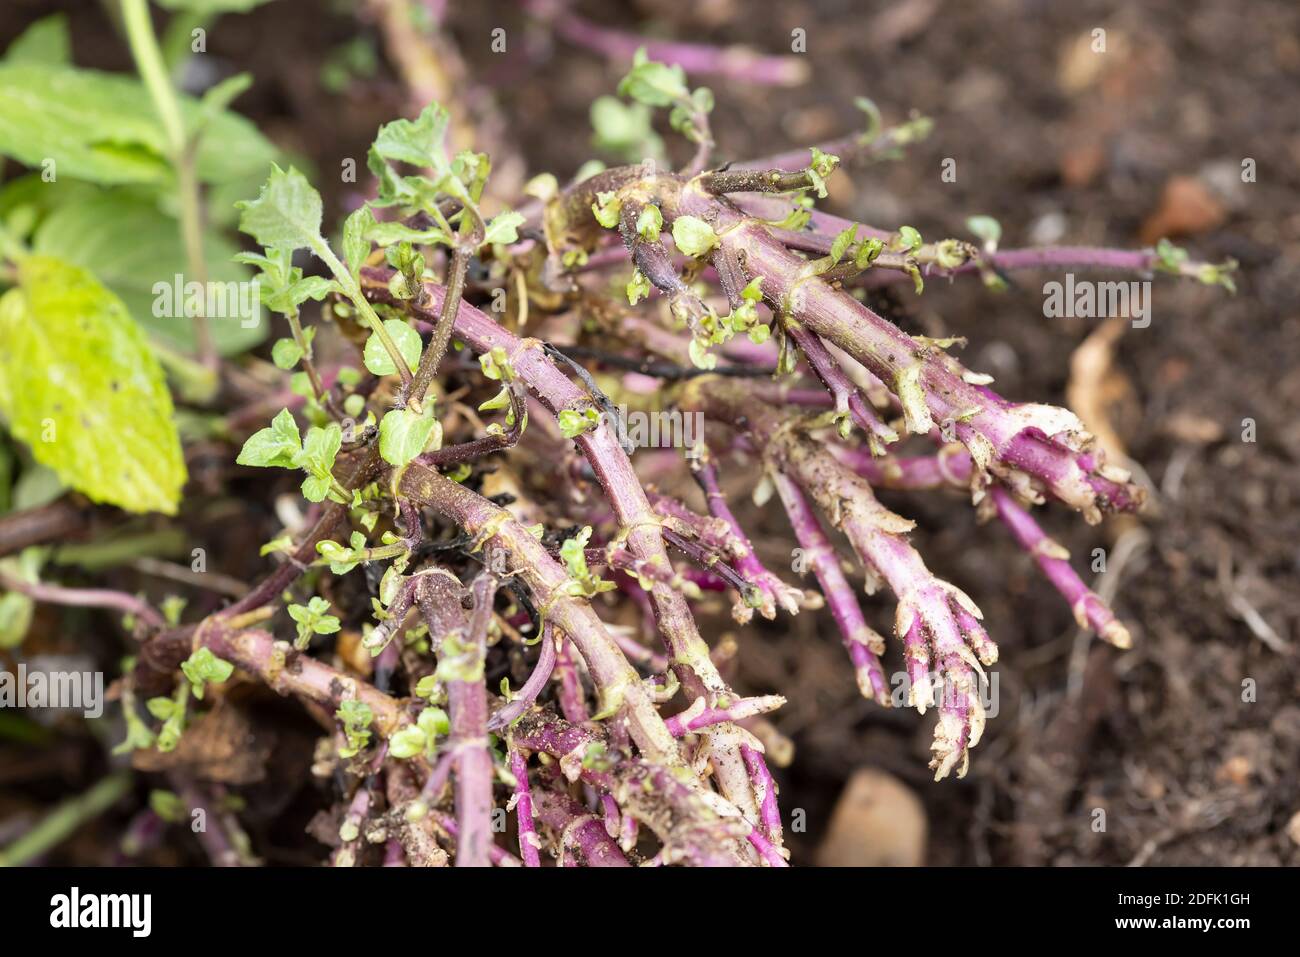 Rhizomes, mint plant (mentha) with rhizomes or rootstocks growing in a garden, UK Stock Photo